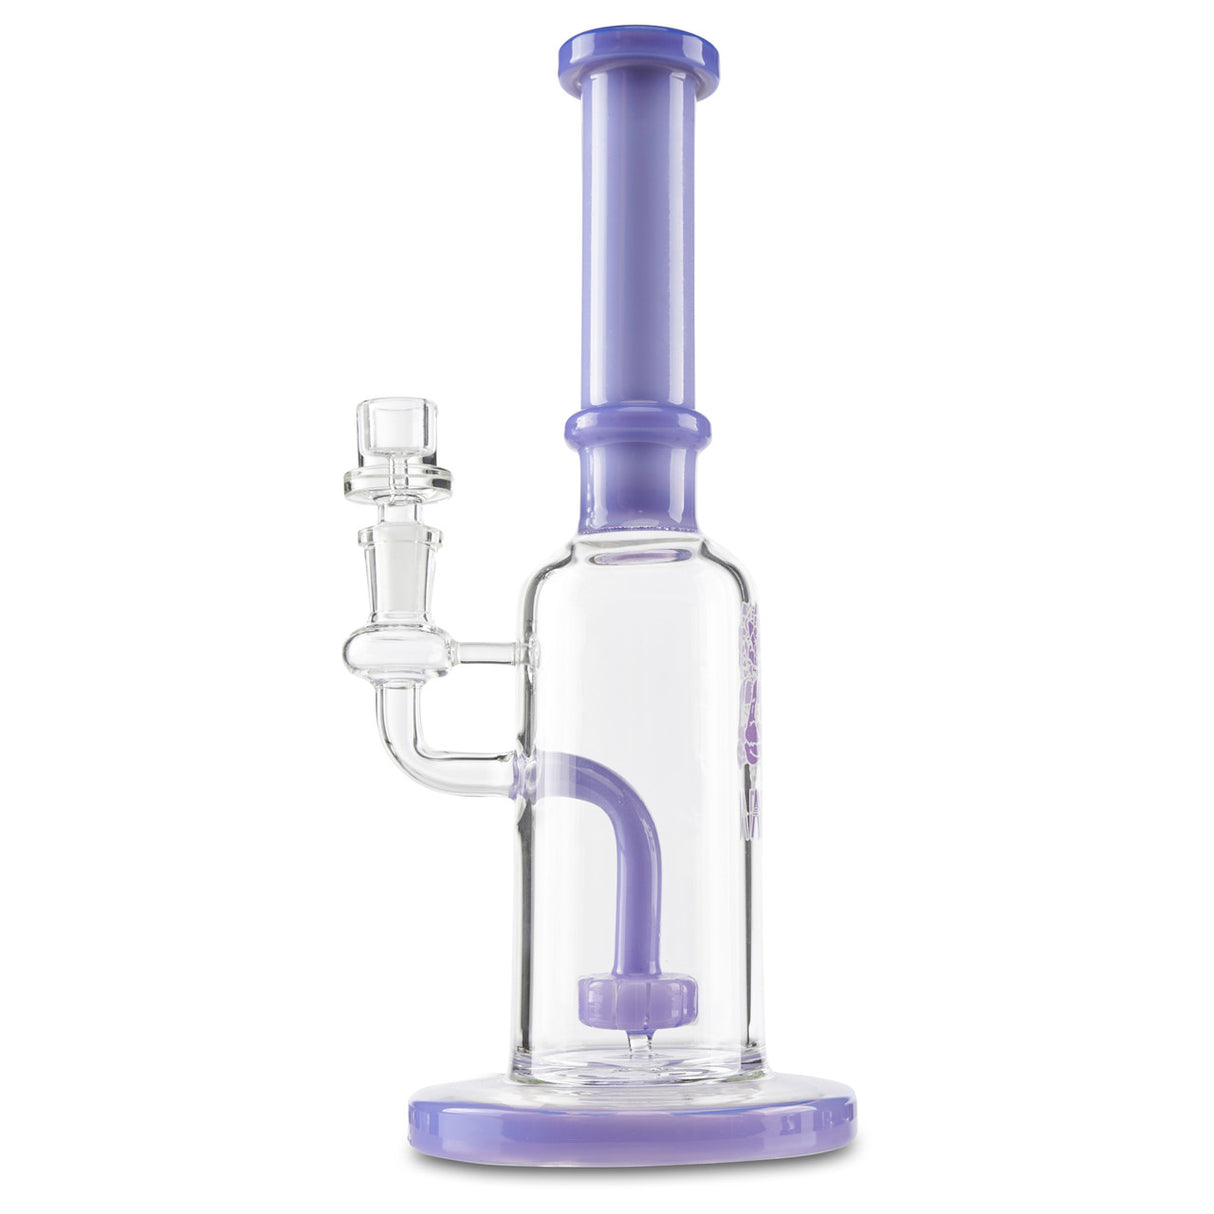 afm glass showerhead water pipe rig for oils